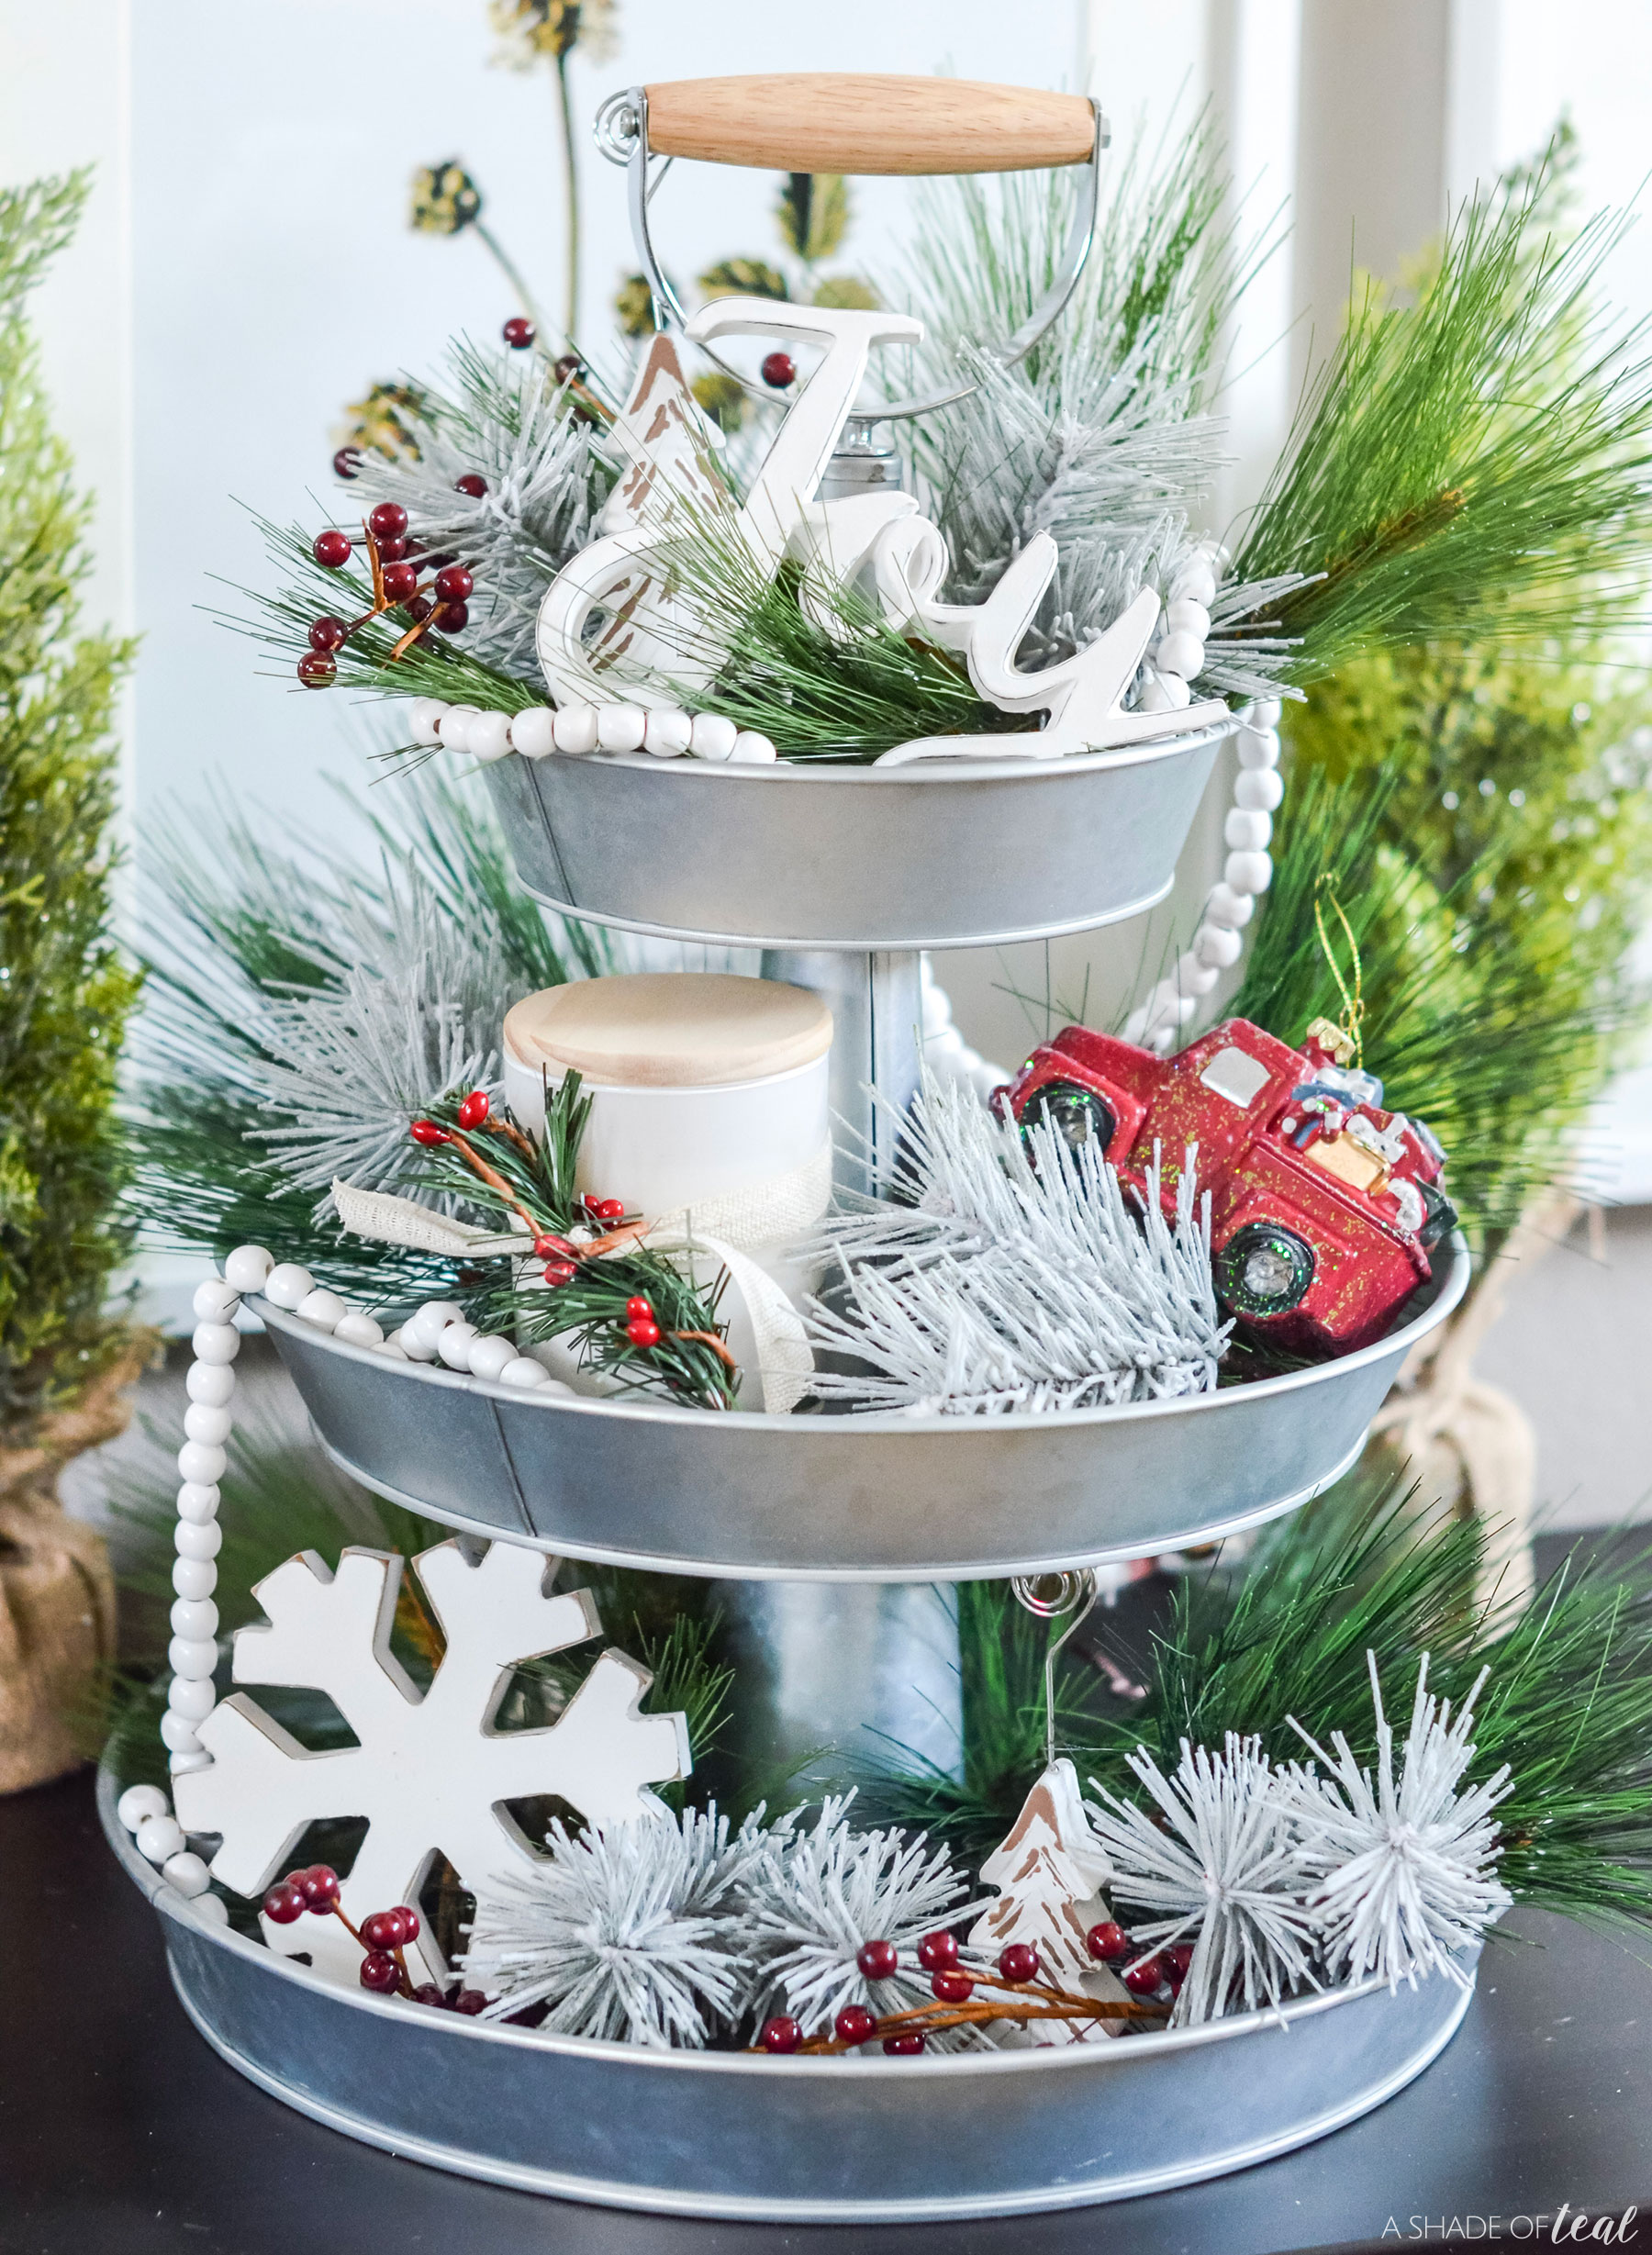 Decorate your Tiered Tray for Christmas